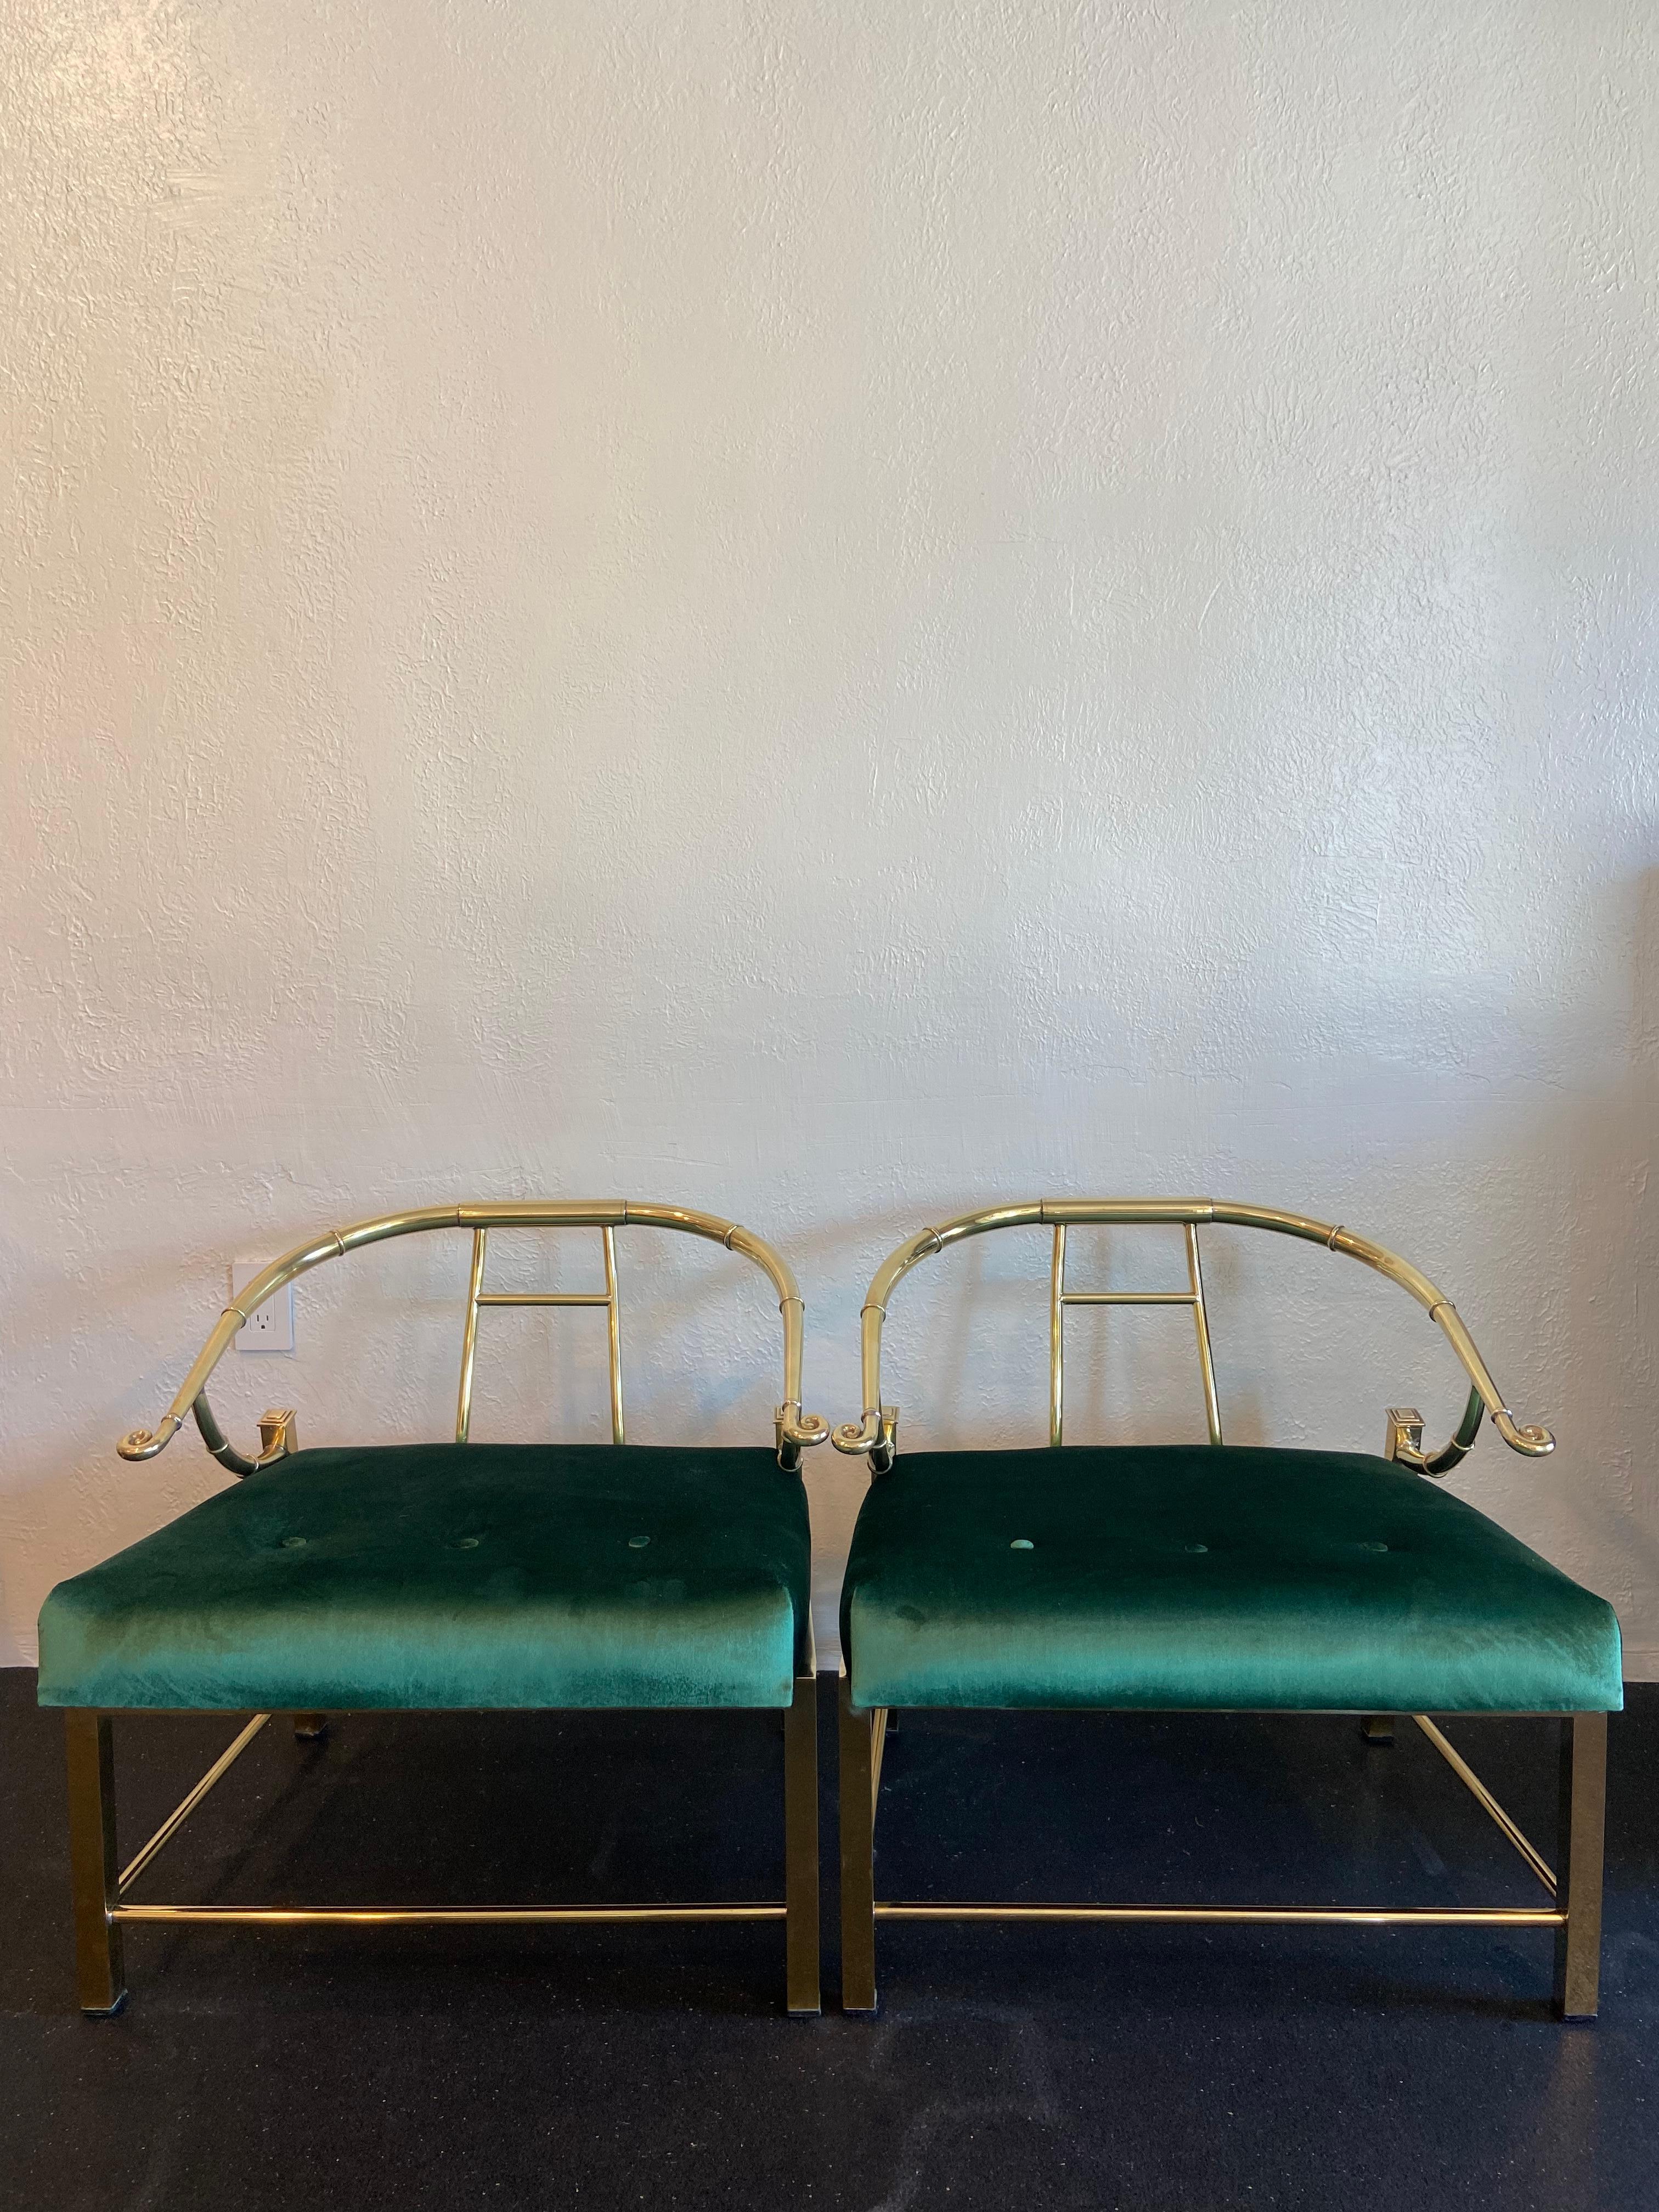 Pair of Mastercraft brass empress chairs. Chairs have been reupholstered in a rich green velvet. They have also been professionally polished, but not sealed (please refer to photos).

Would work well in a variety of interiors such as modern, mid